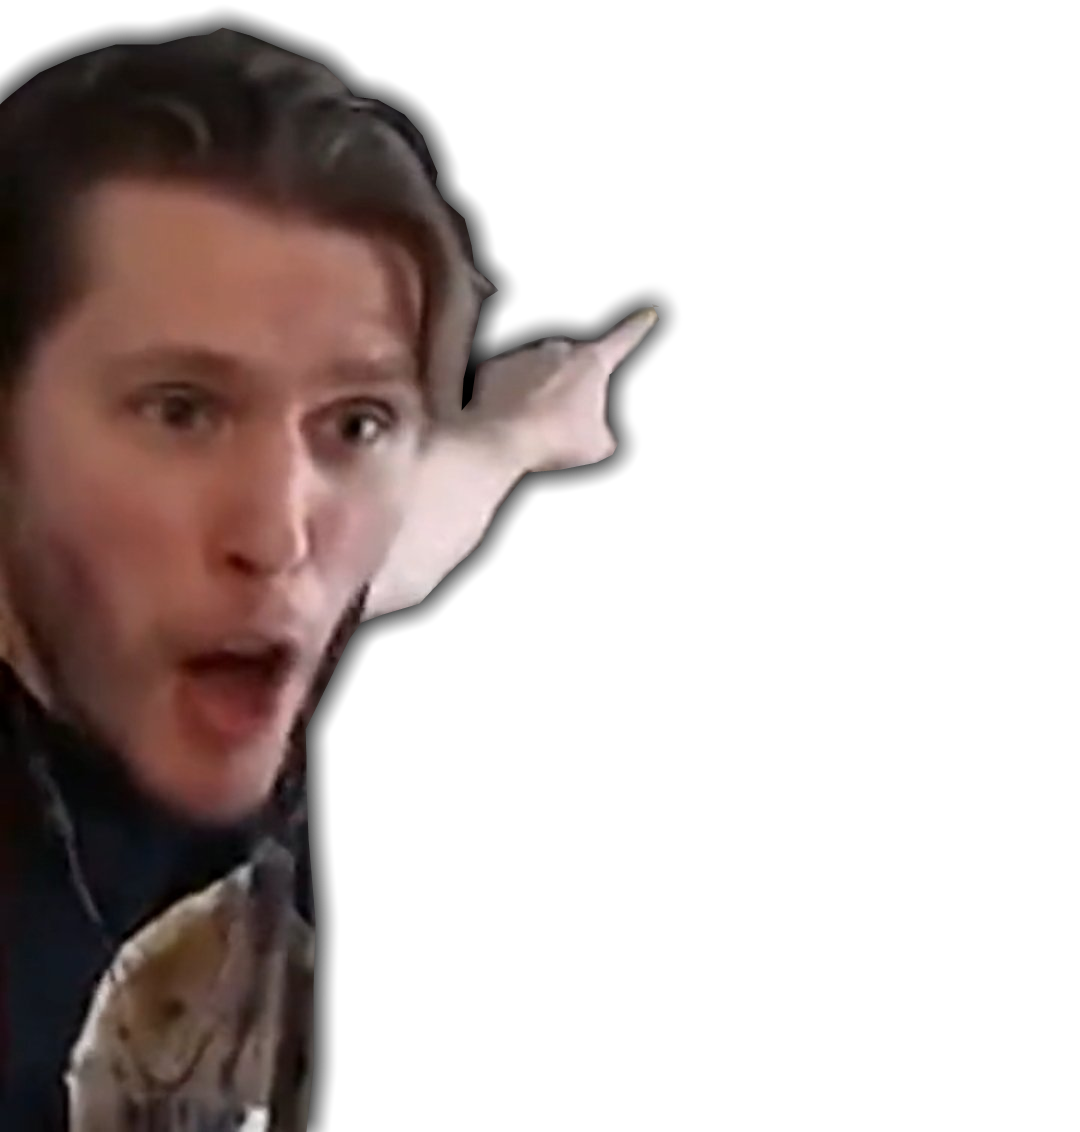 jerma985 pointing at something Blank Template Imgflip